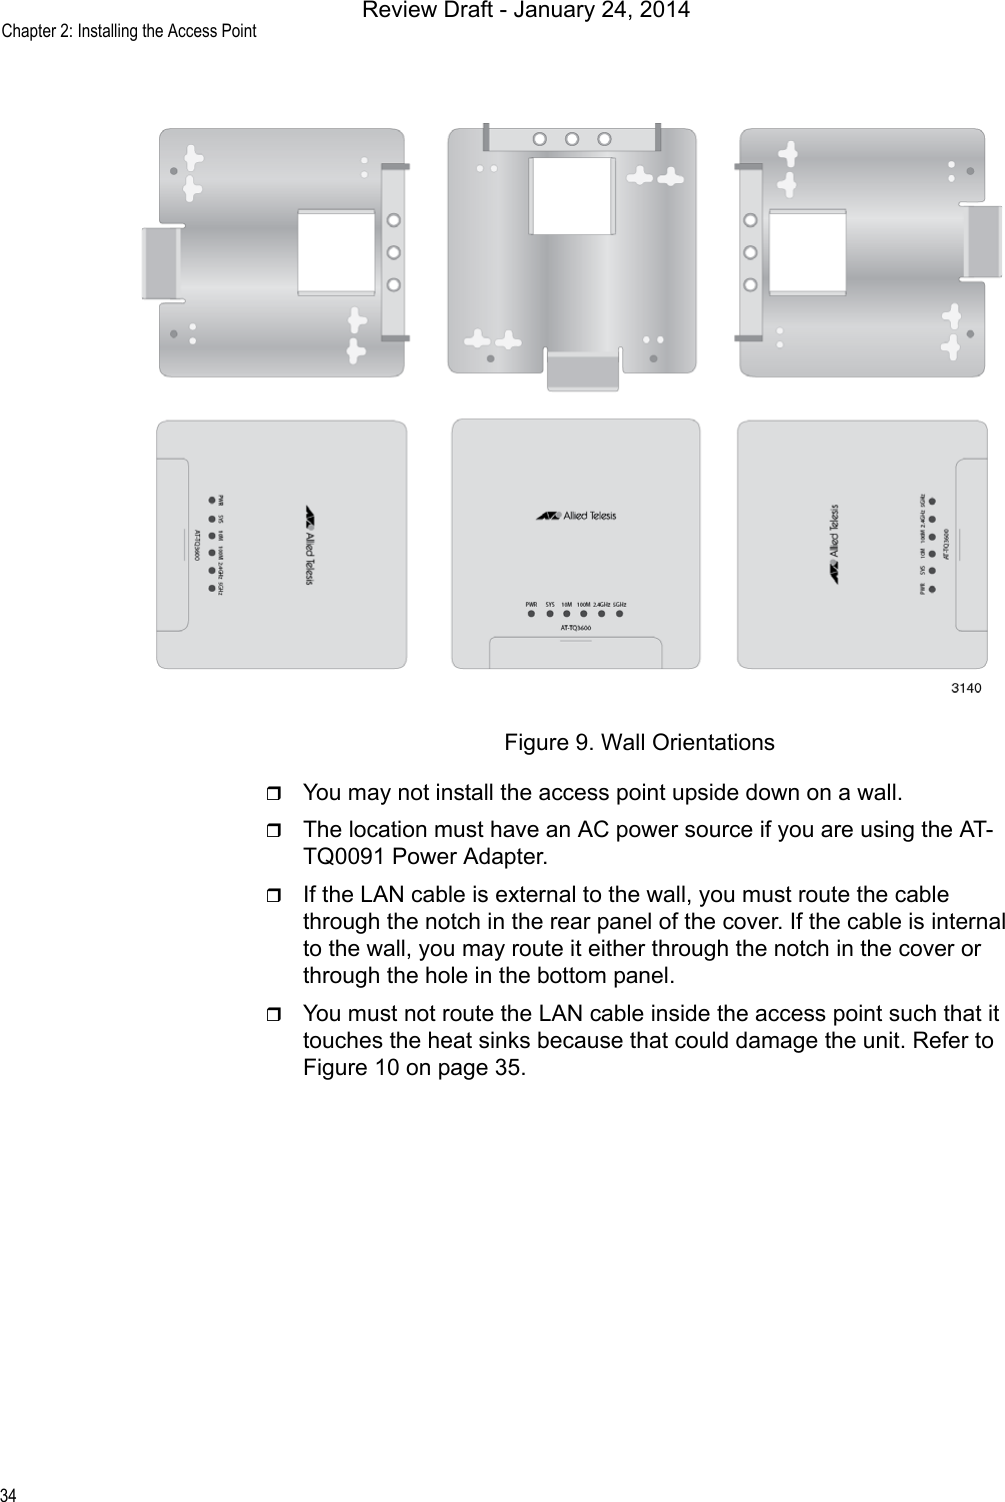 Chapter 2: Installing the Access Point34Figure 9. Wall OrientationsYou may not install the access point upside down on a wall.The location must have an AC power source if you are using the AT-TQ0091 Power Adapter.If the LAN cable is external to the wall, you must route the cable through the notch in the rear panel of the cover. If the cable is internal to the wall, you may route it either through the notch in the cover or through the hole in the bottom panel.You must not route the LAN cable inside the access point such that it touches the heat sinks because that could damage the unit. Refer to Figure 10 on page 35.Review Draft - January 24, 2014